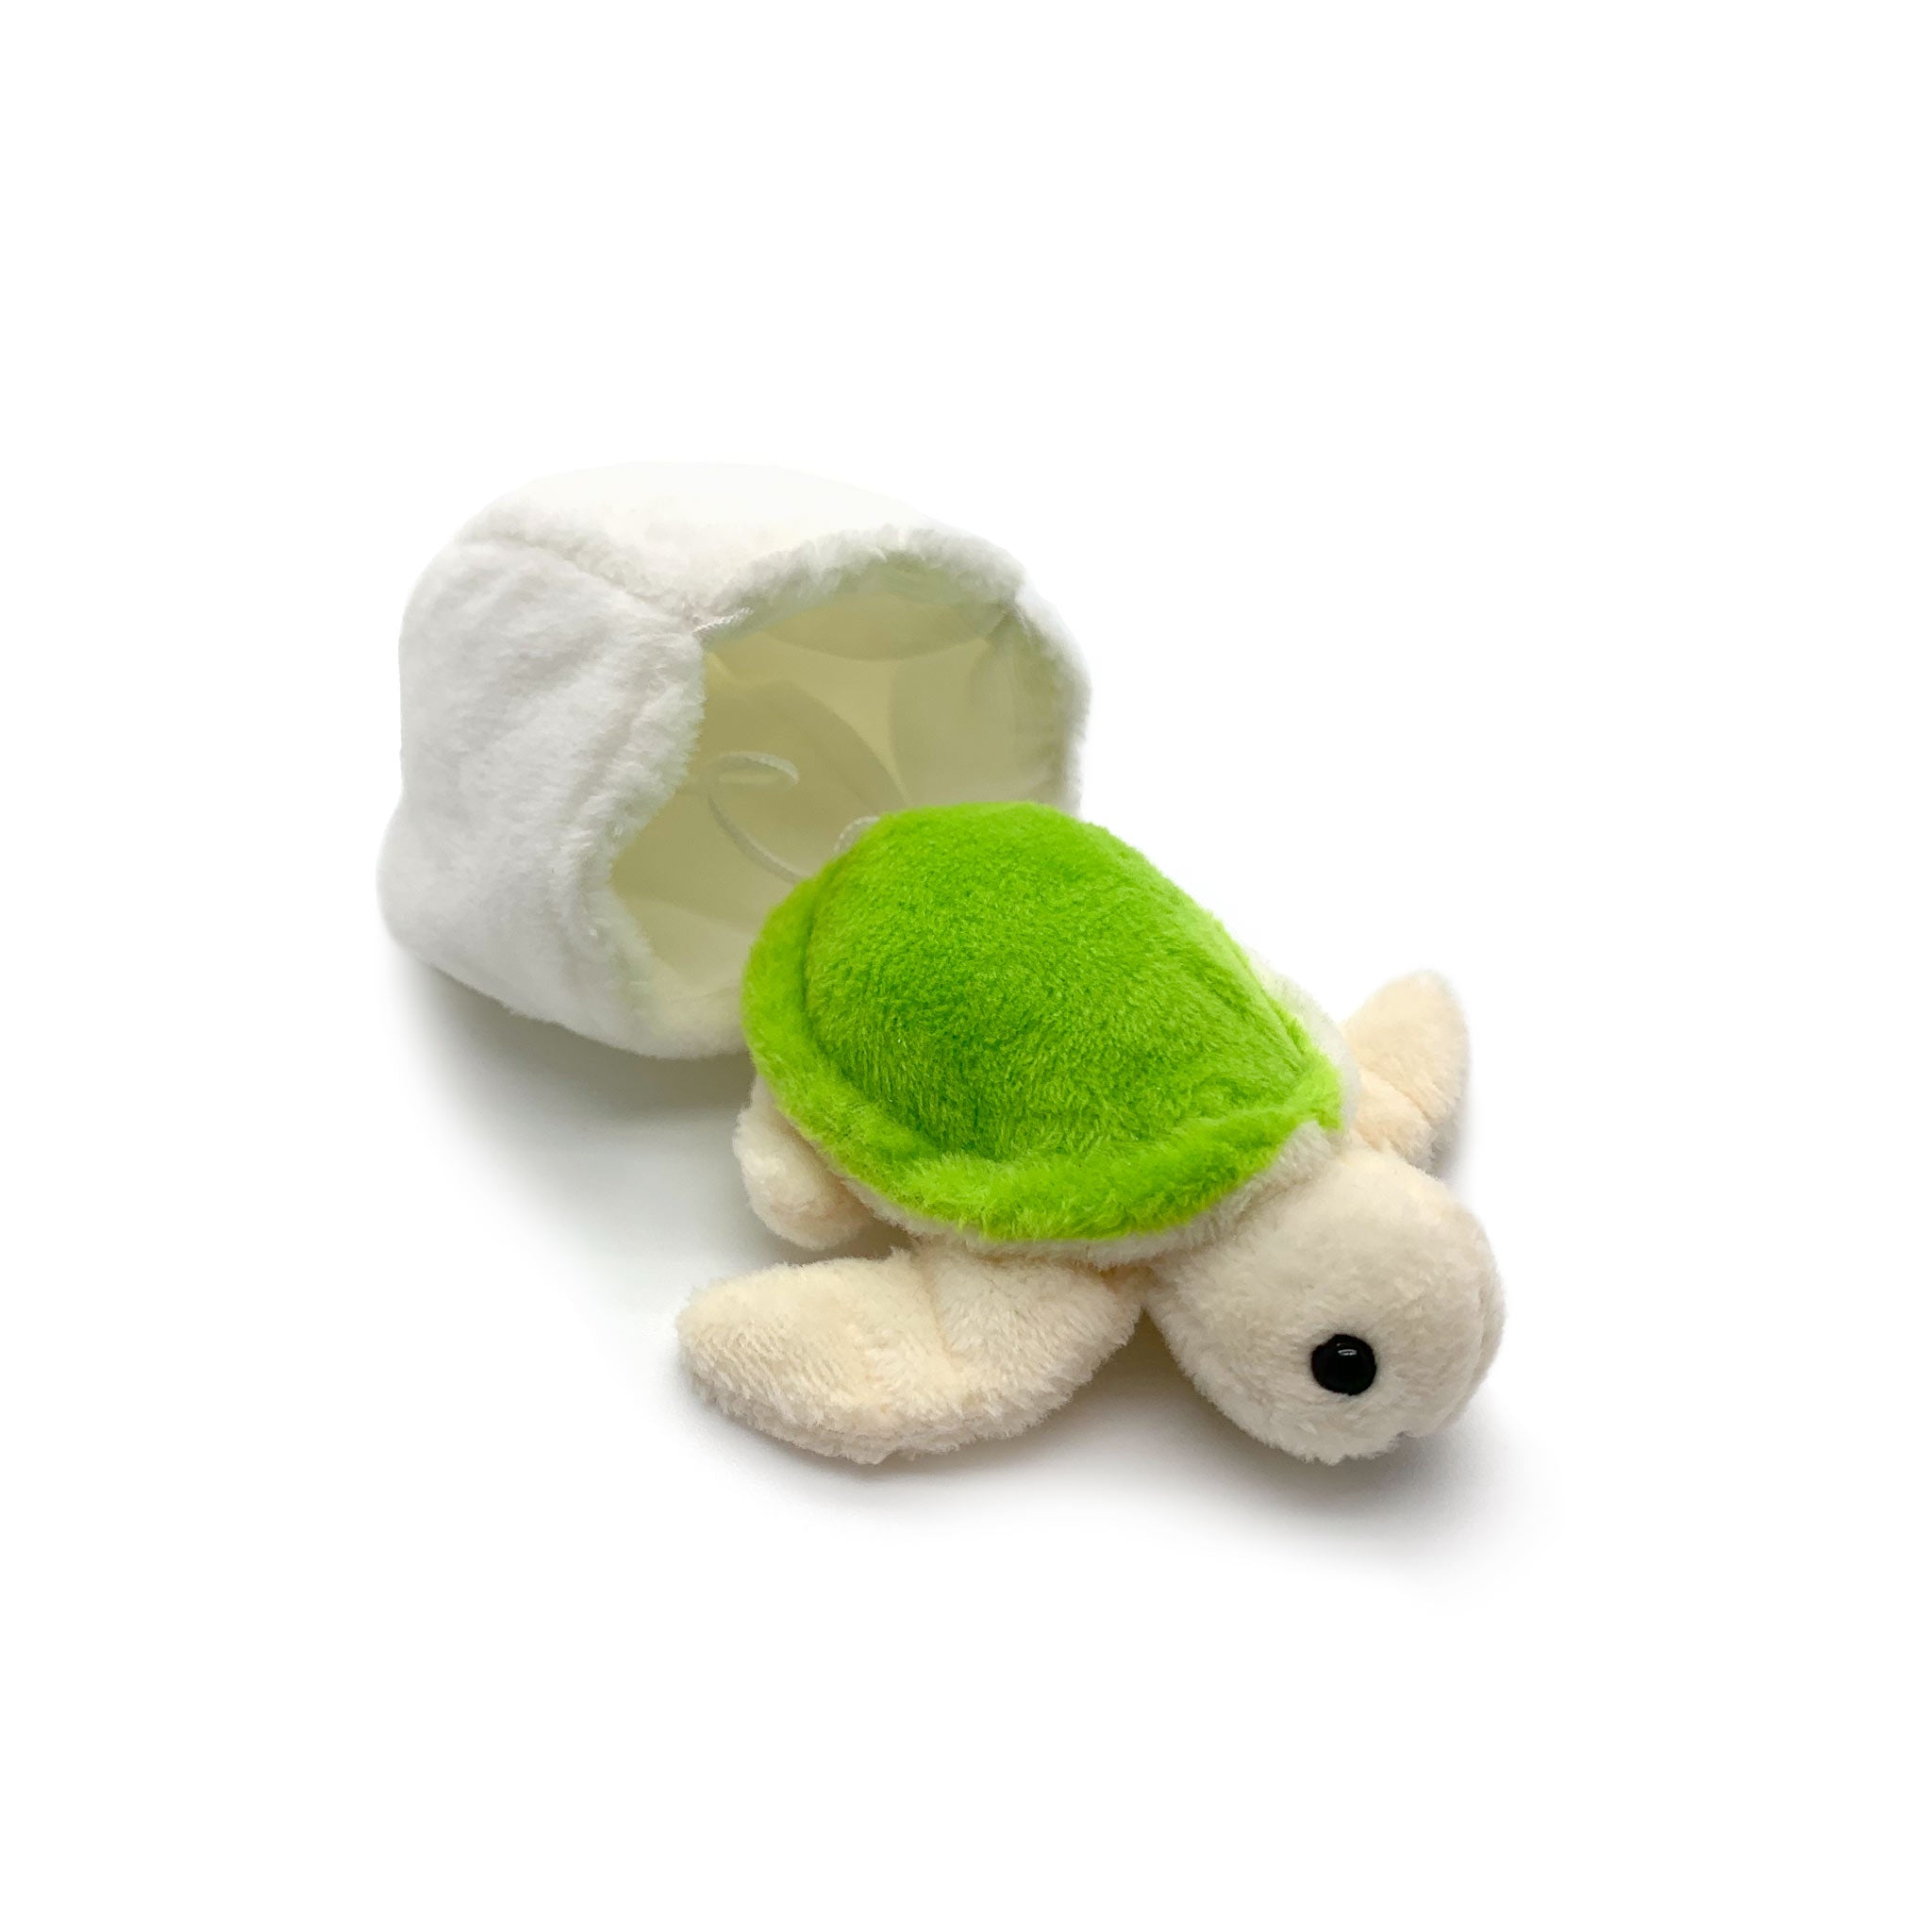 Happy Hatchlings: Zoom Hatchling Turtle Plush Toy (green